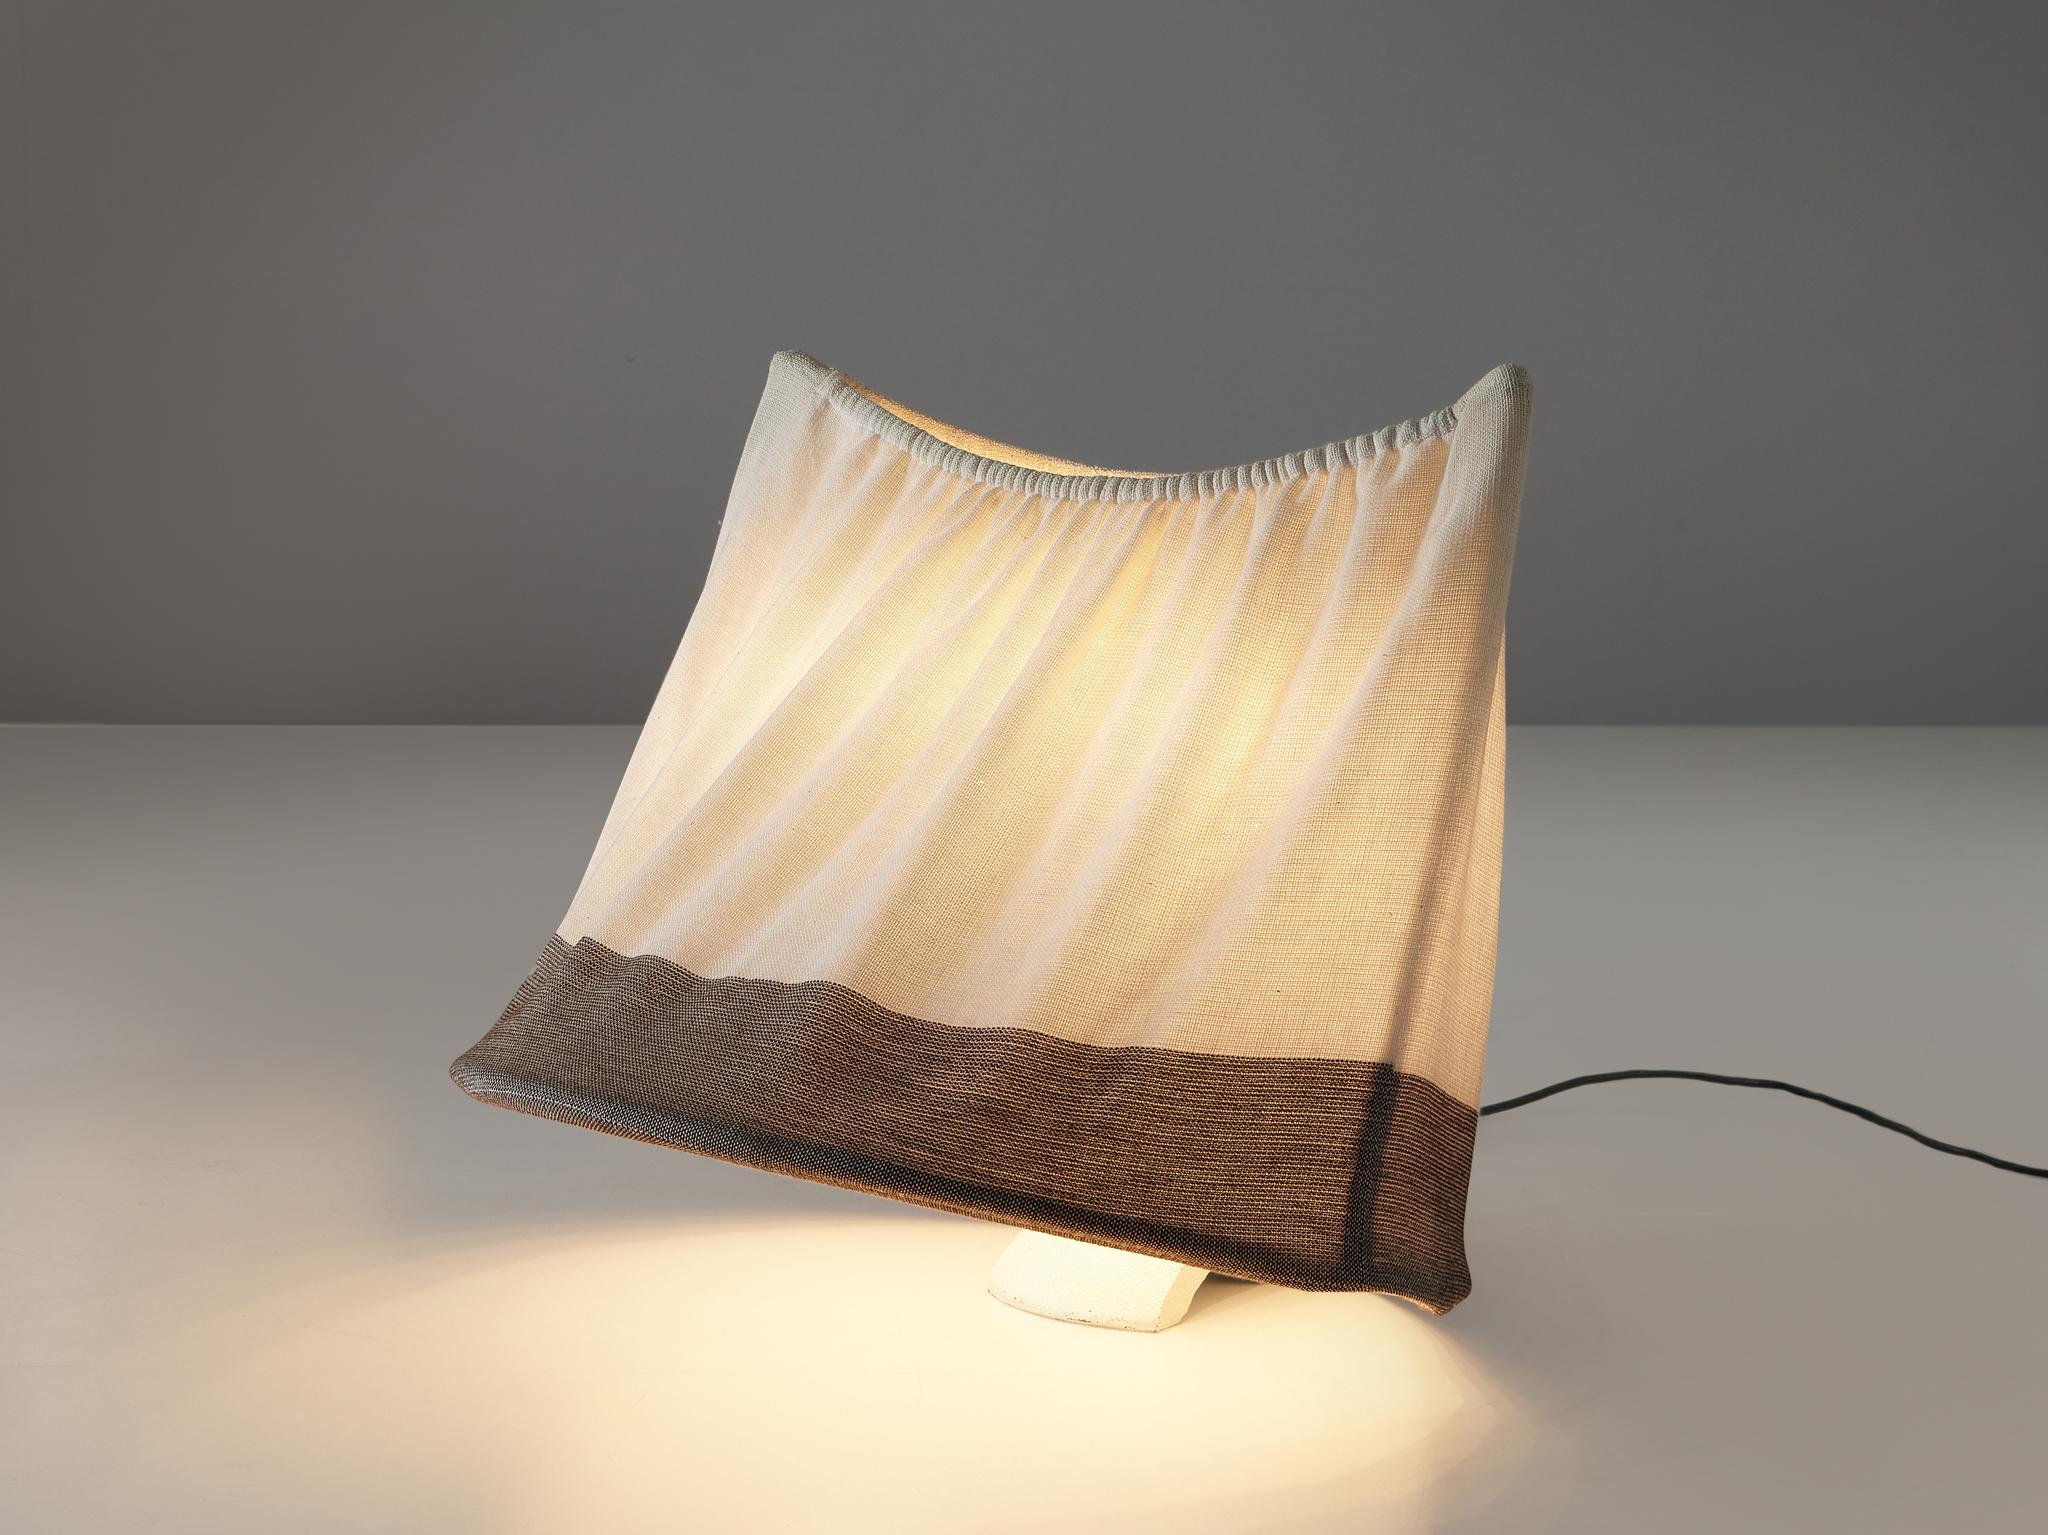 Mario Bellini for Artemide, table lamp, lacquered metal, fabric, Italy, 1978. 

Quirky and quite unique, this 'circo' table lamp designed by Mario Bellini, is a true example of Bellini's original approach towards furniture design. The shade, which